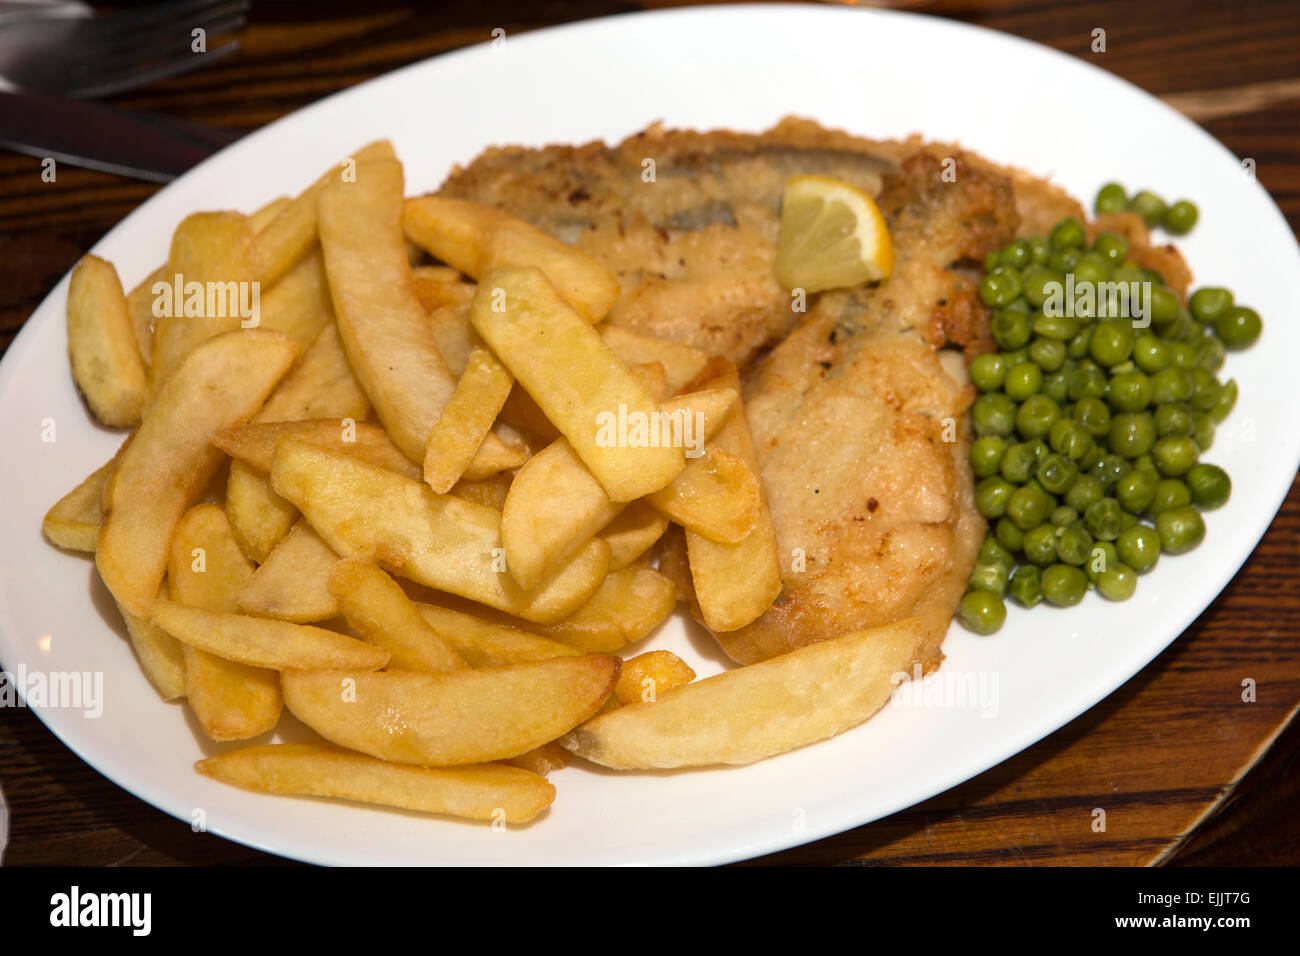 South Atlantic, Falklands, Port Stanley, Globe Tavern, bar food, plate of fish and chips Stock Photo